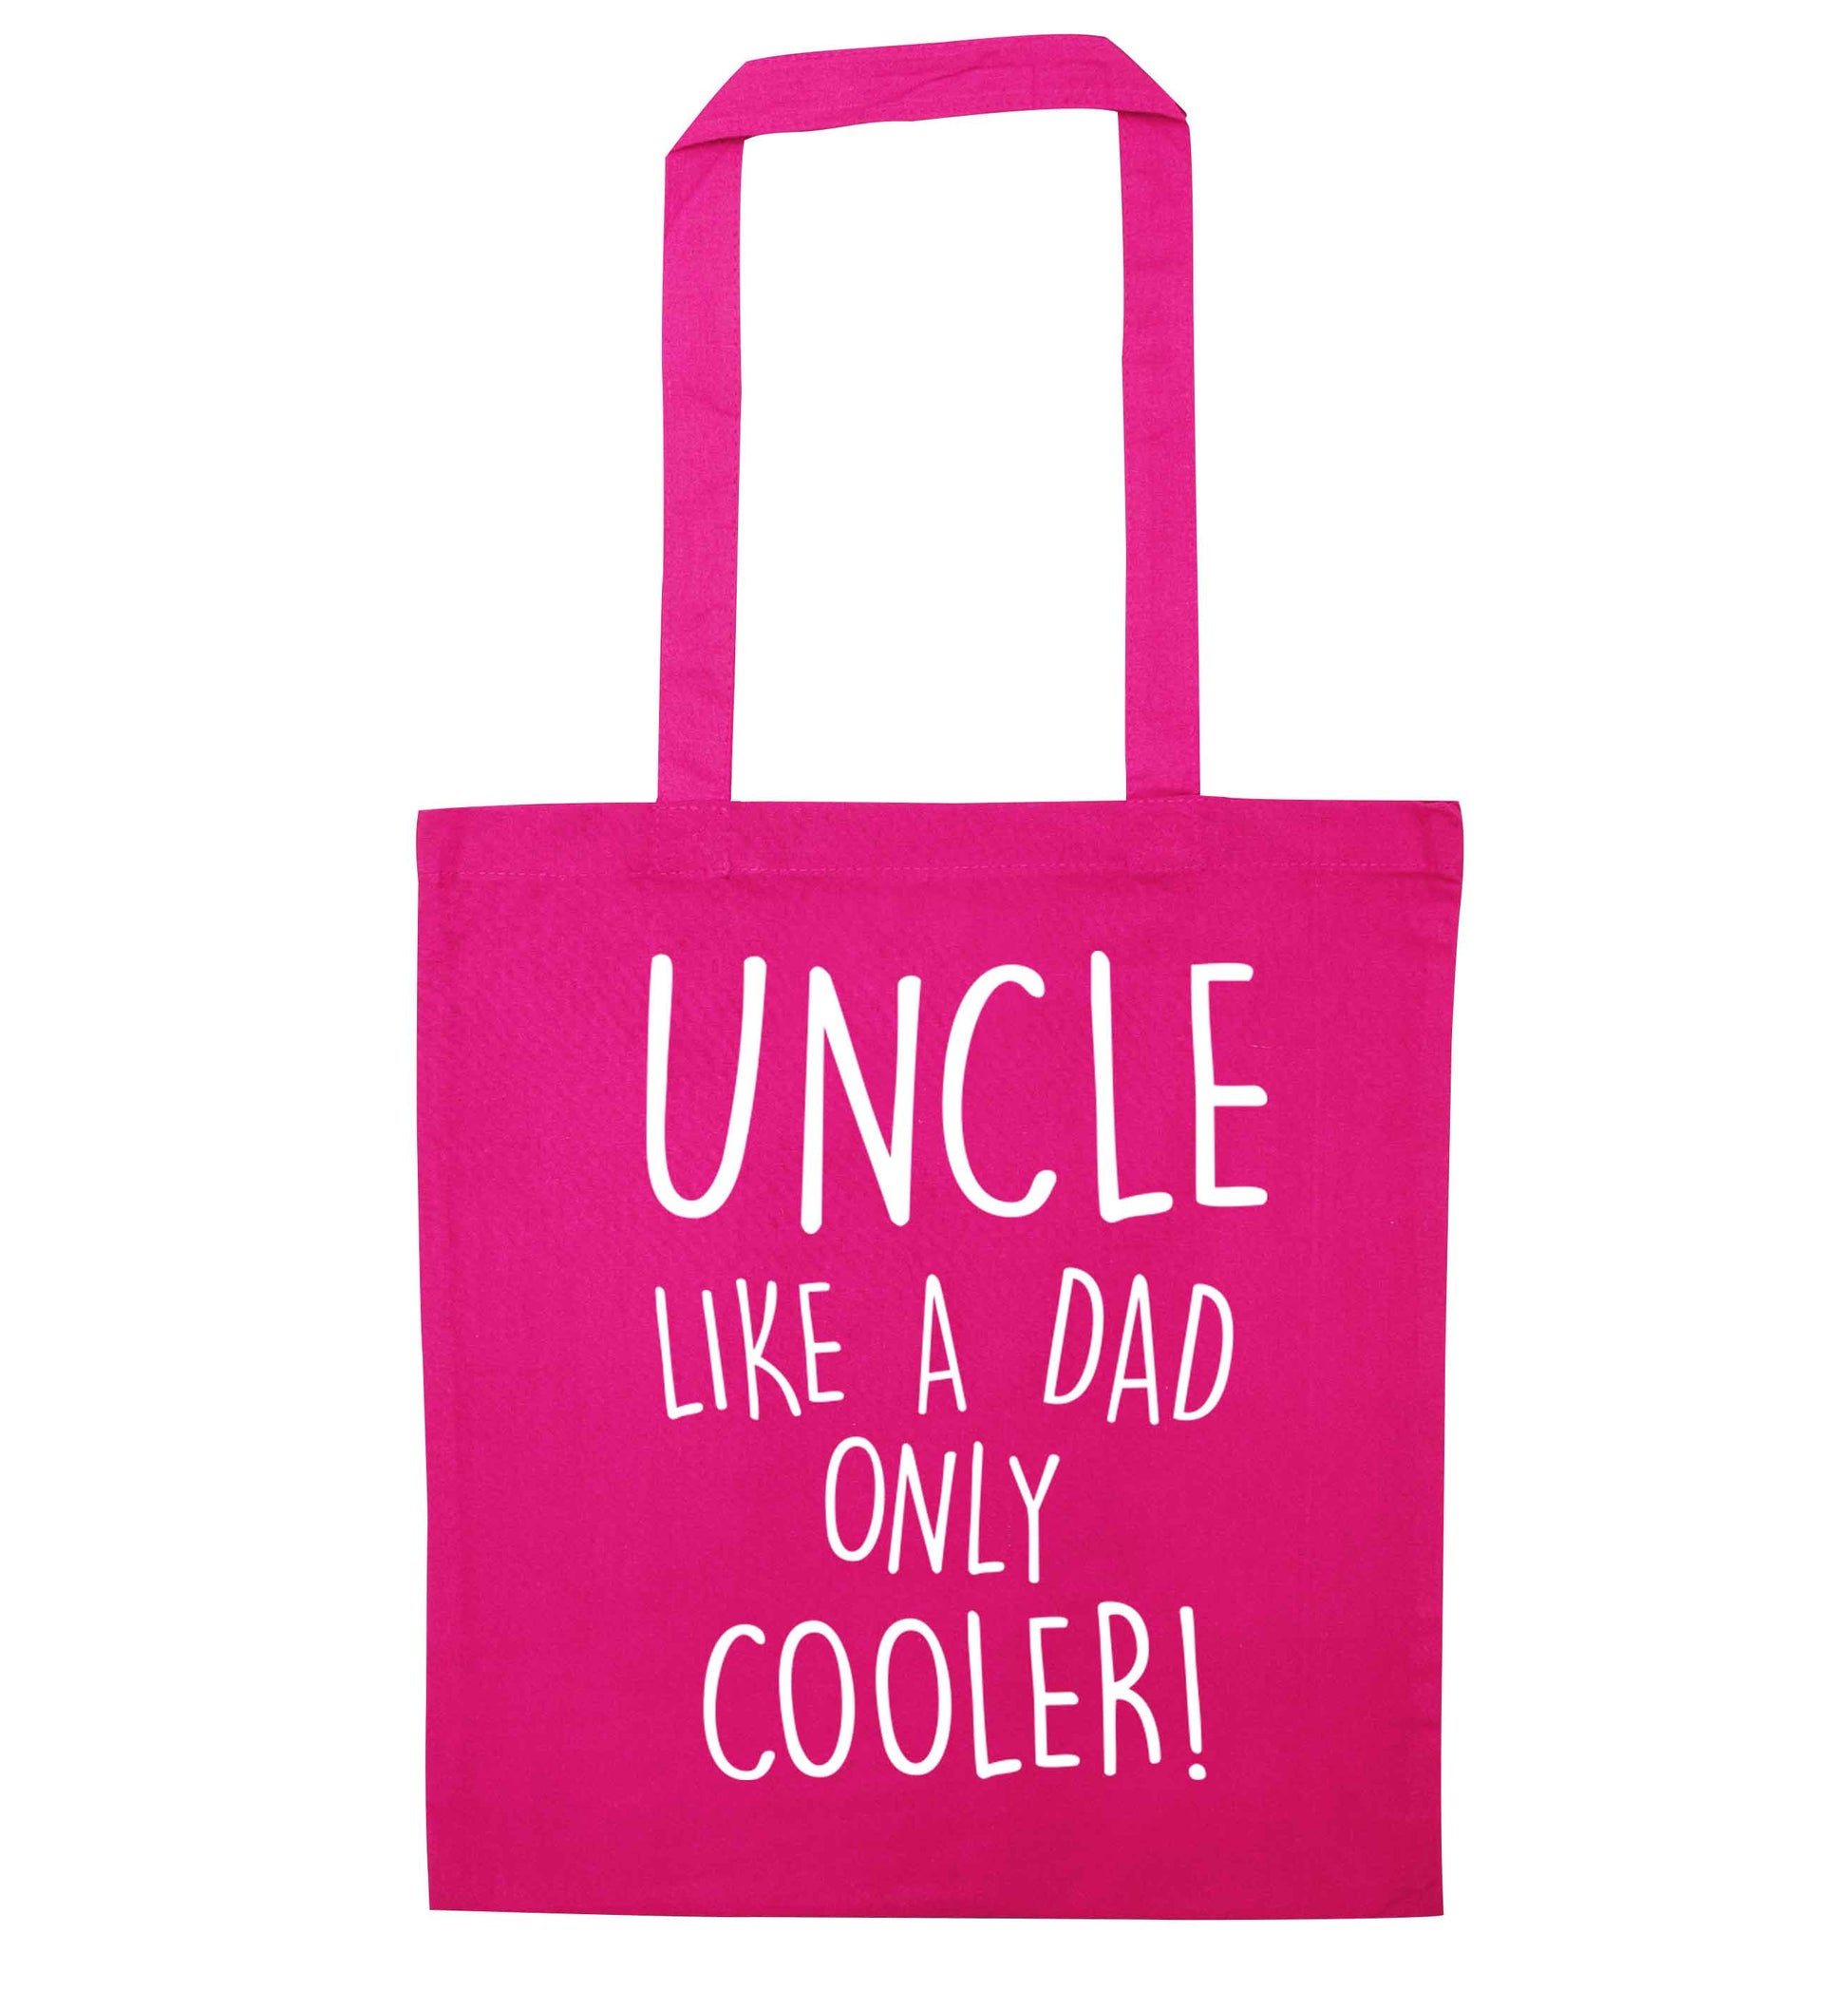 Uncle like a dad only cooler pink tote bag